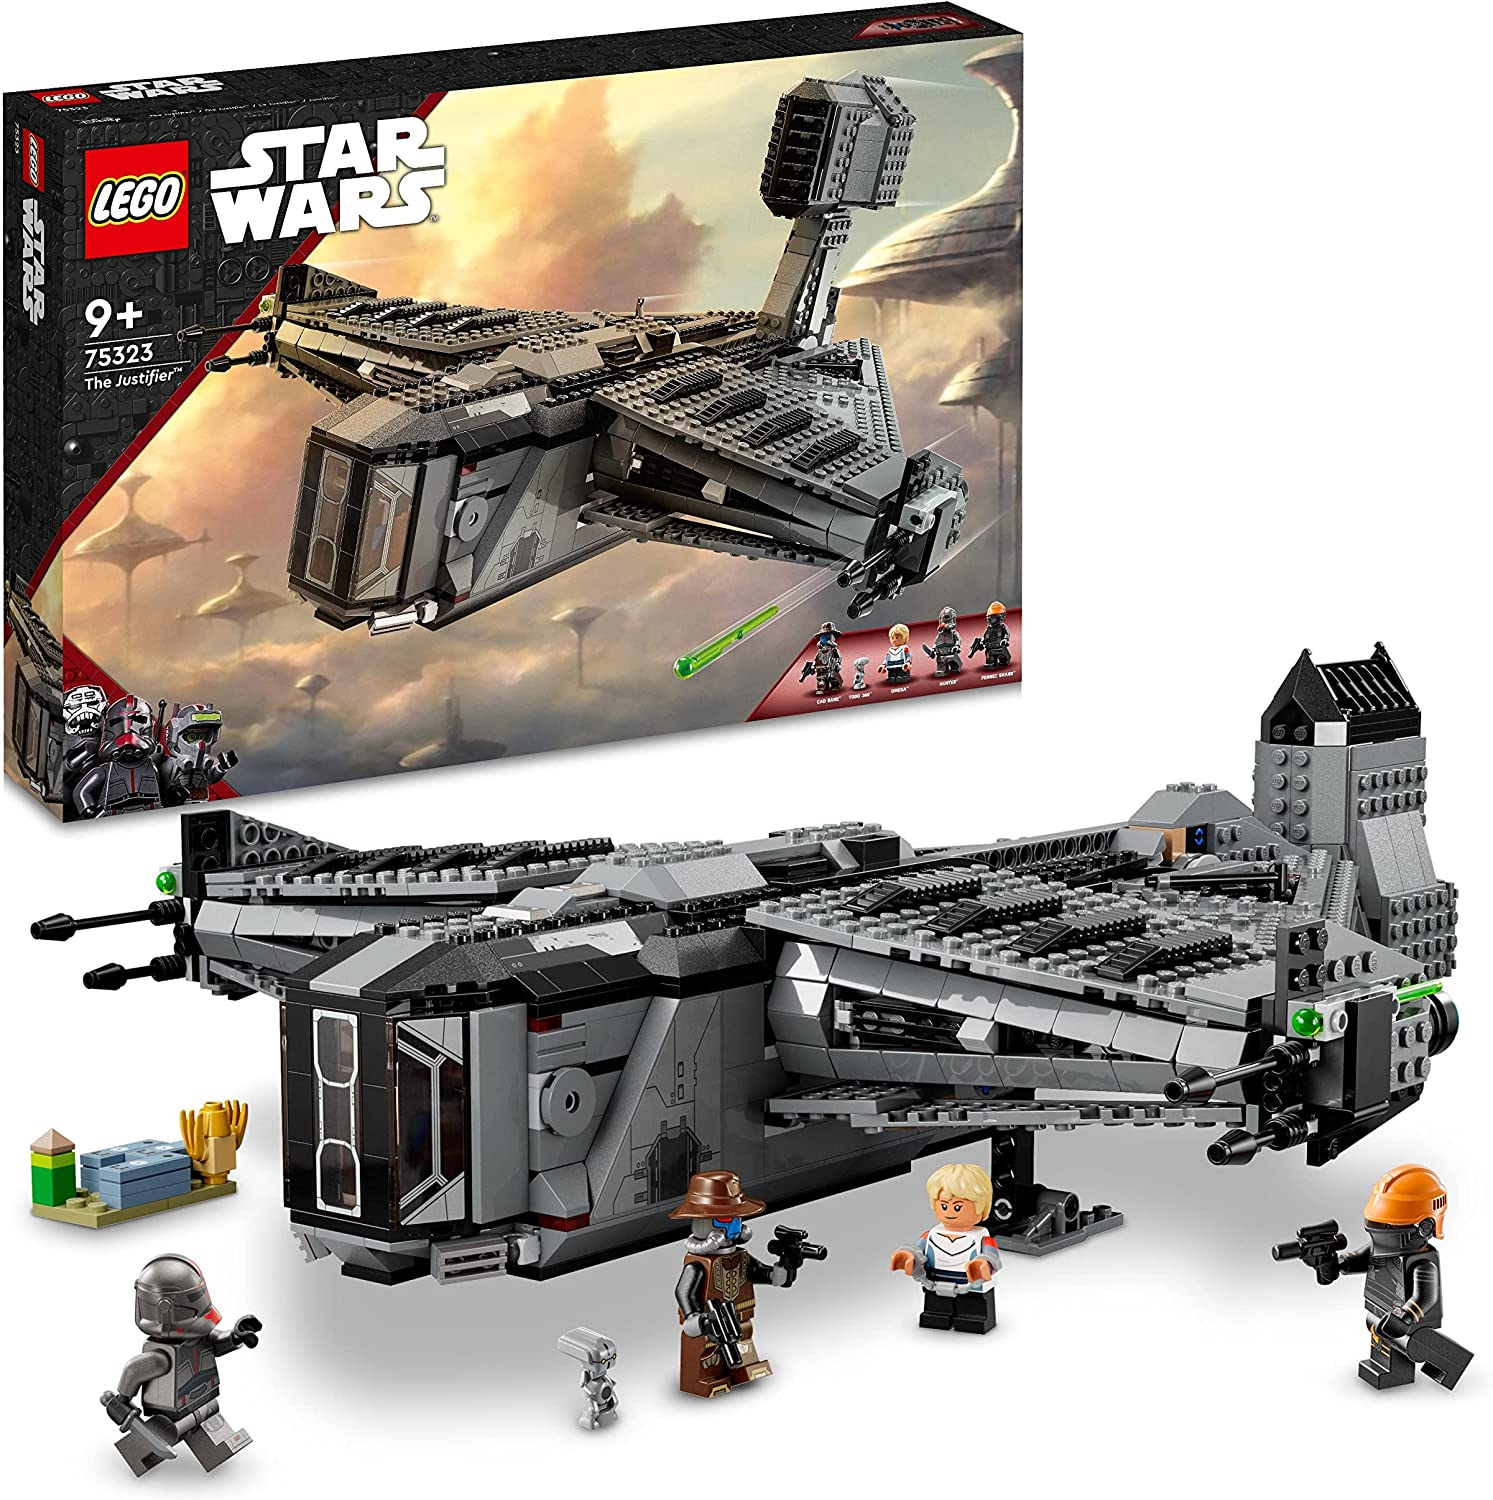 LEGO 75323 Star Wars The Justifier, Buildable Toy, Starship with Cad Bane Mini Figure and Droid Todo 360, The Bad Batch Set, for Children